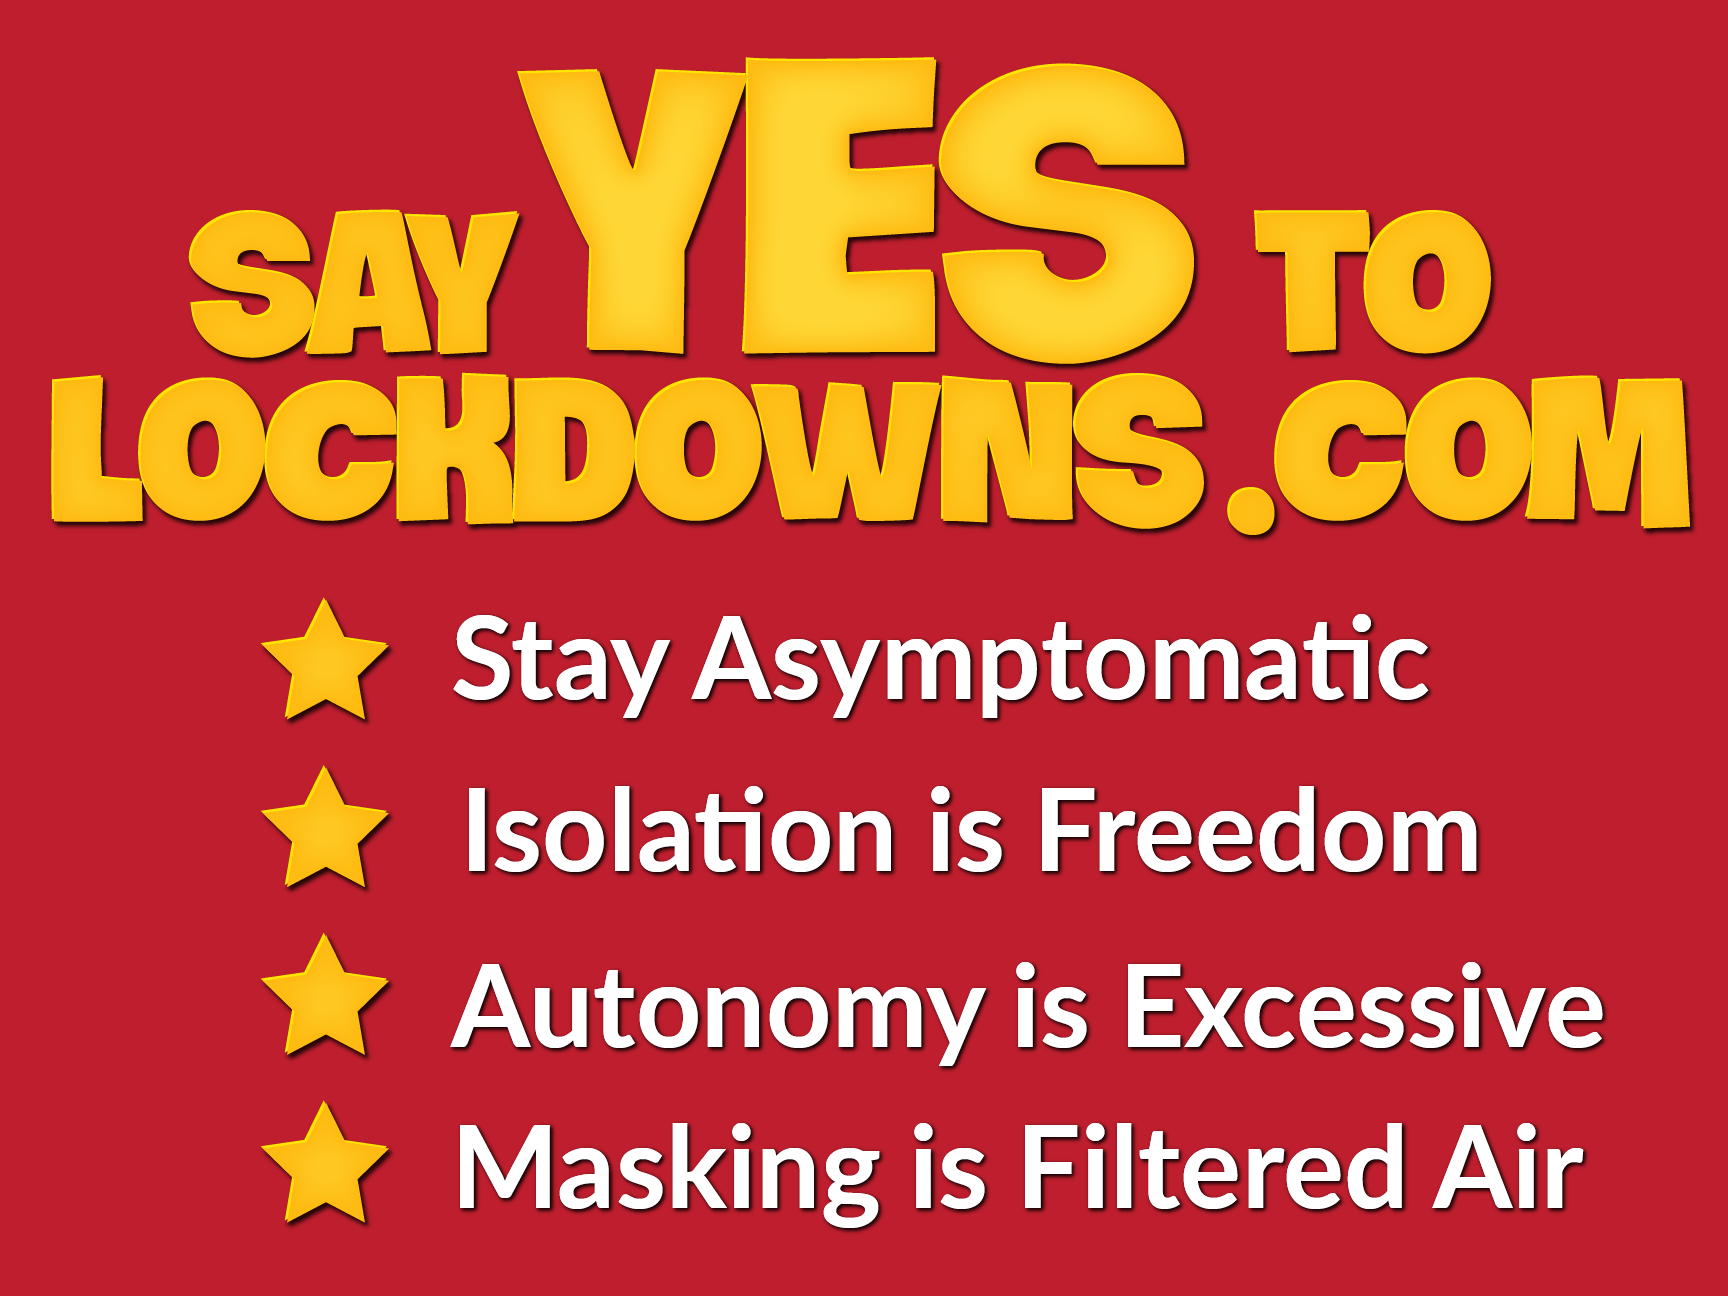 Say Yes to Lockdowns